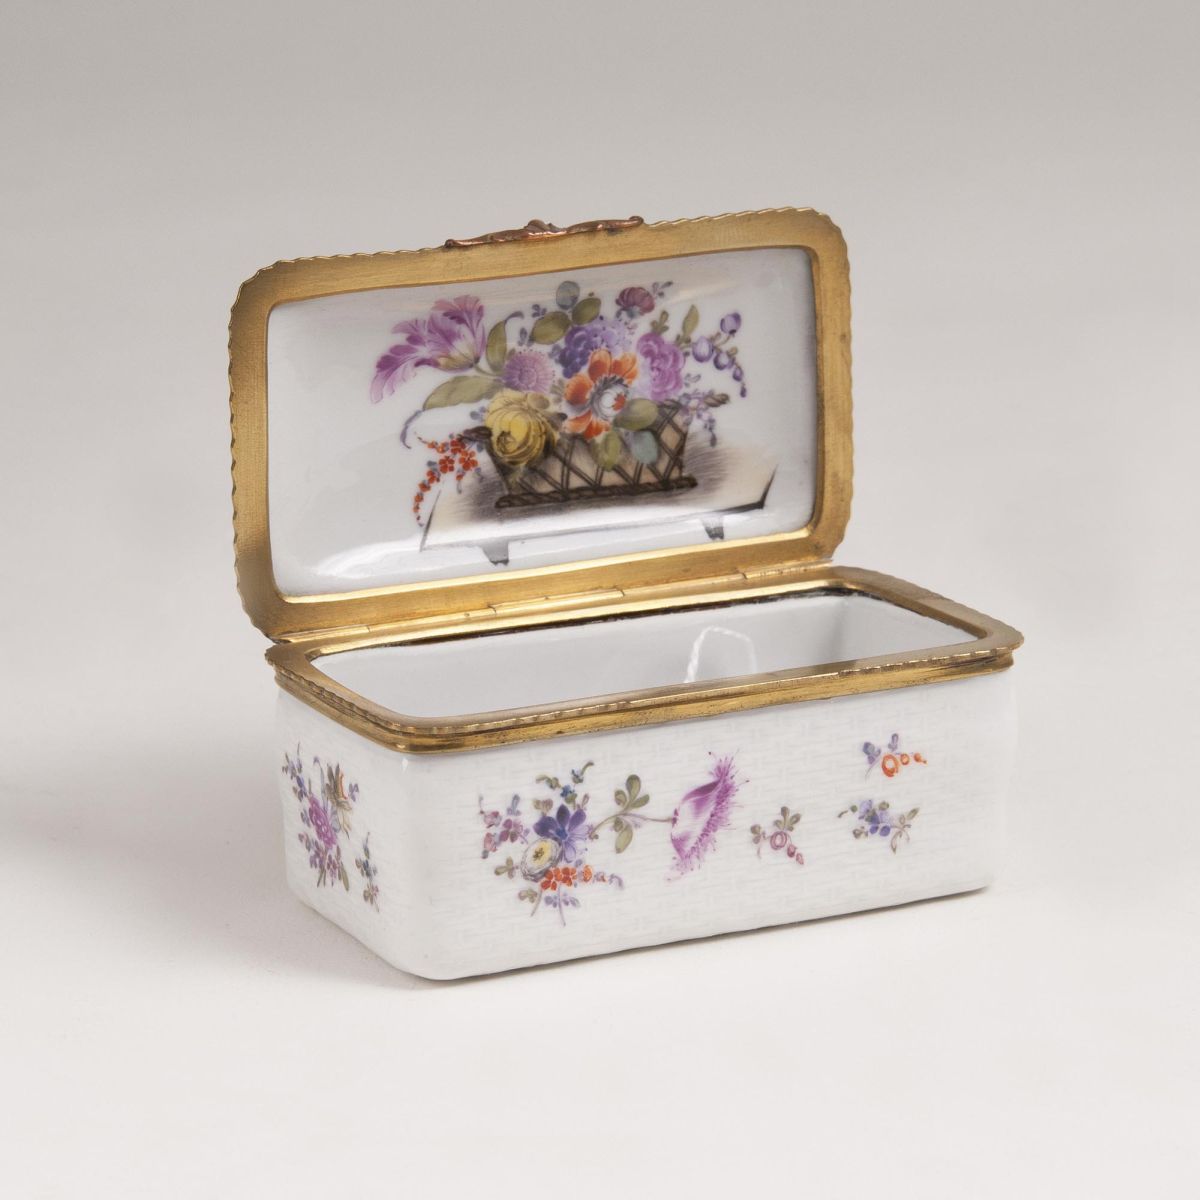 A Snuff Box with Ozier Relief and Flower Painting - image 2